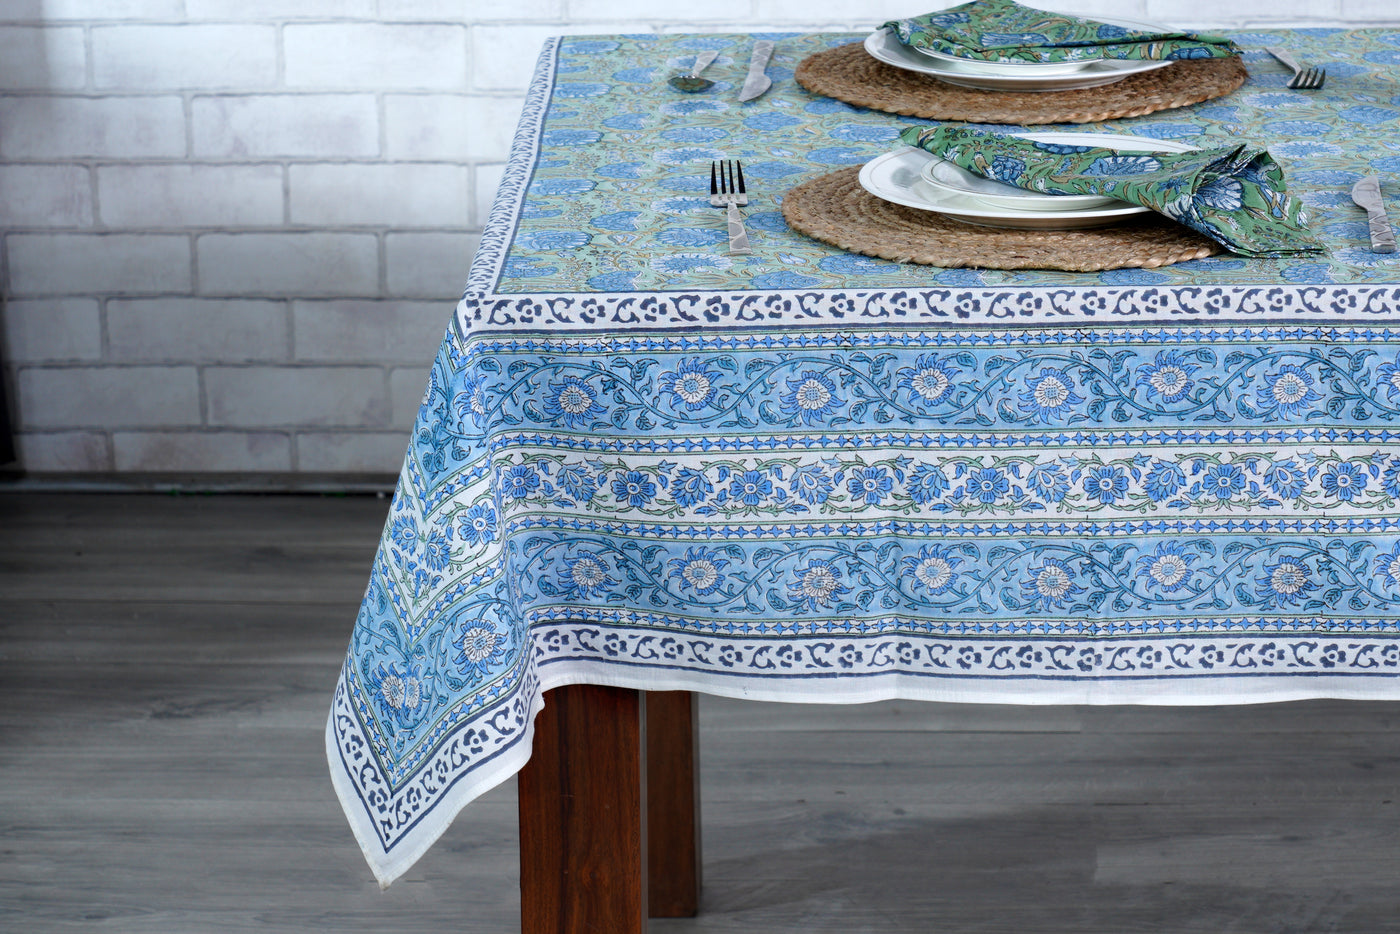 Fabricrush Asparagus Green Air Force Blue Dye Base Indian Traditional Hand Block Printed Cotton Tablecloth